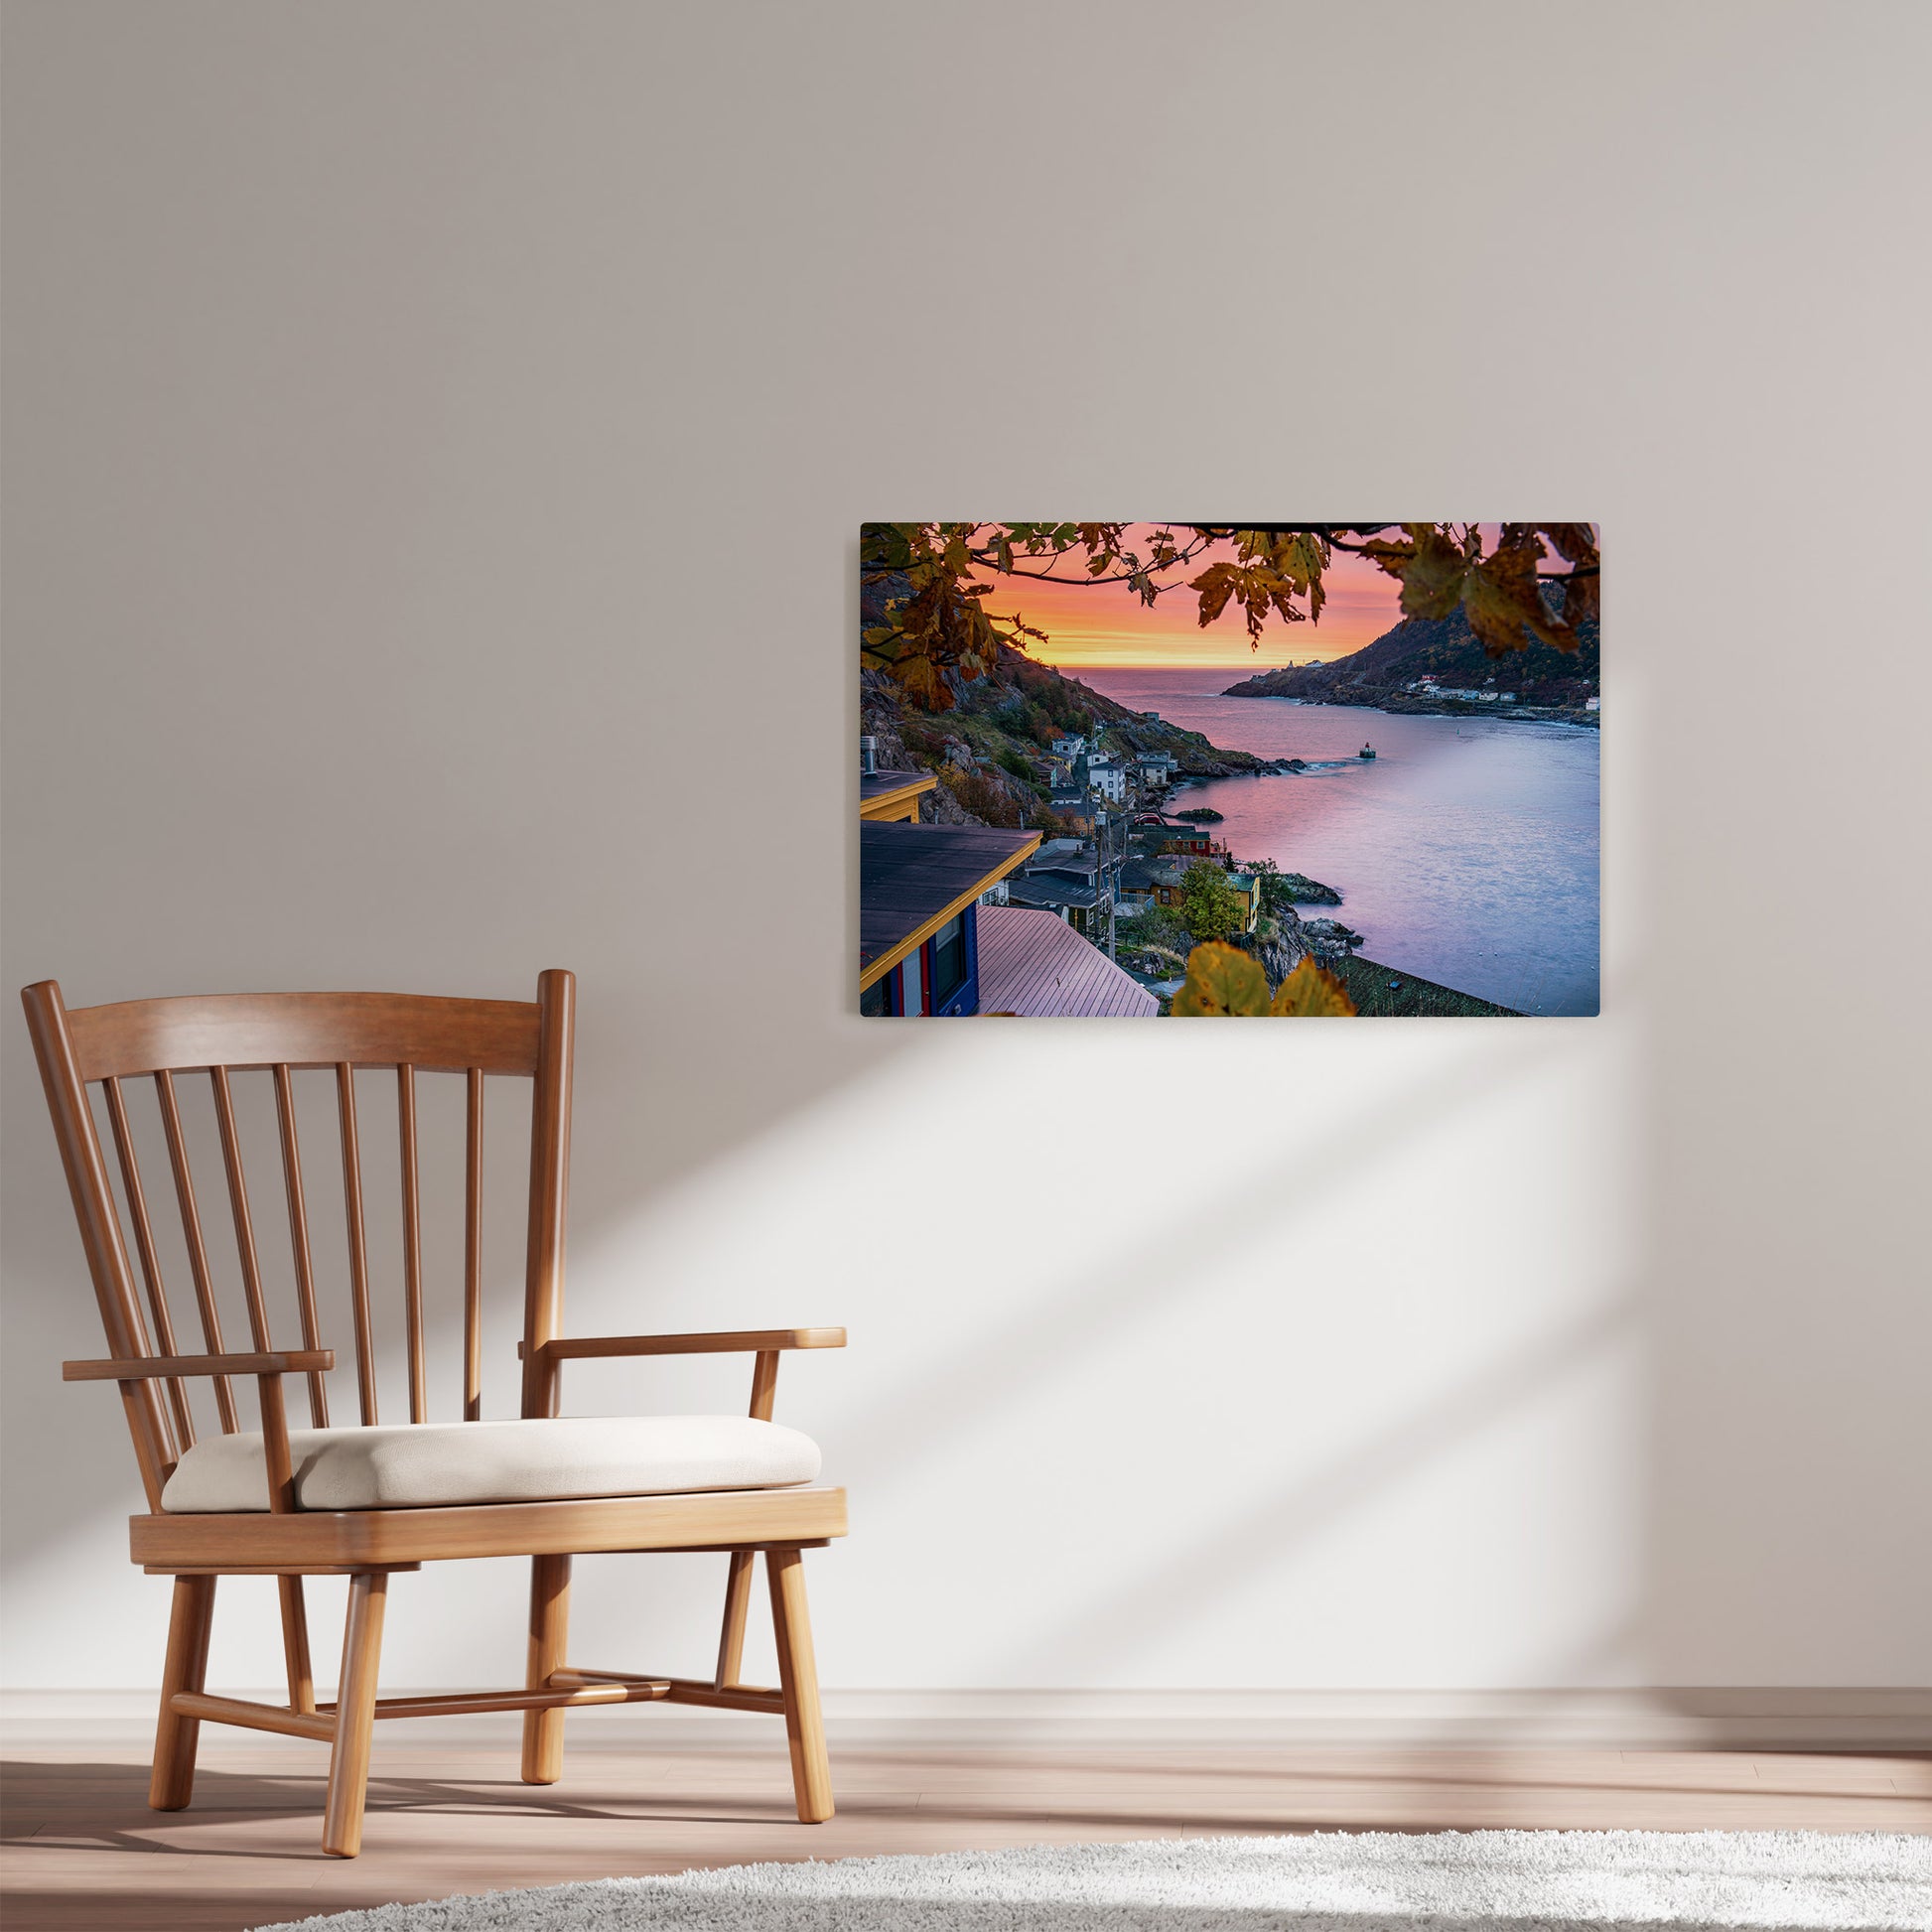 Ray Mackey's Battery Sunrise photography reproduced on HD metal print and displayed on wall